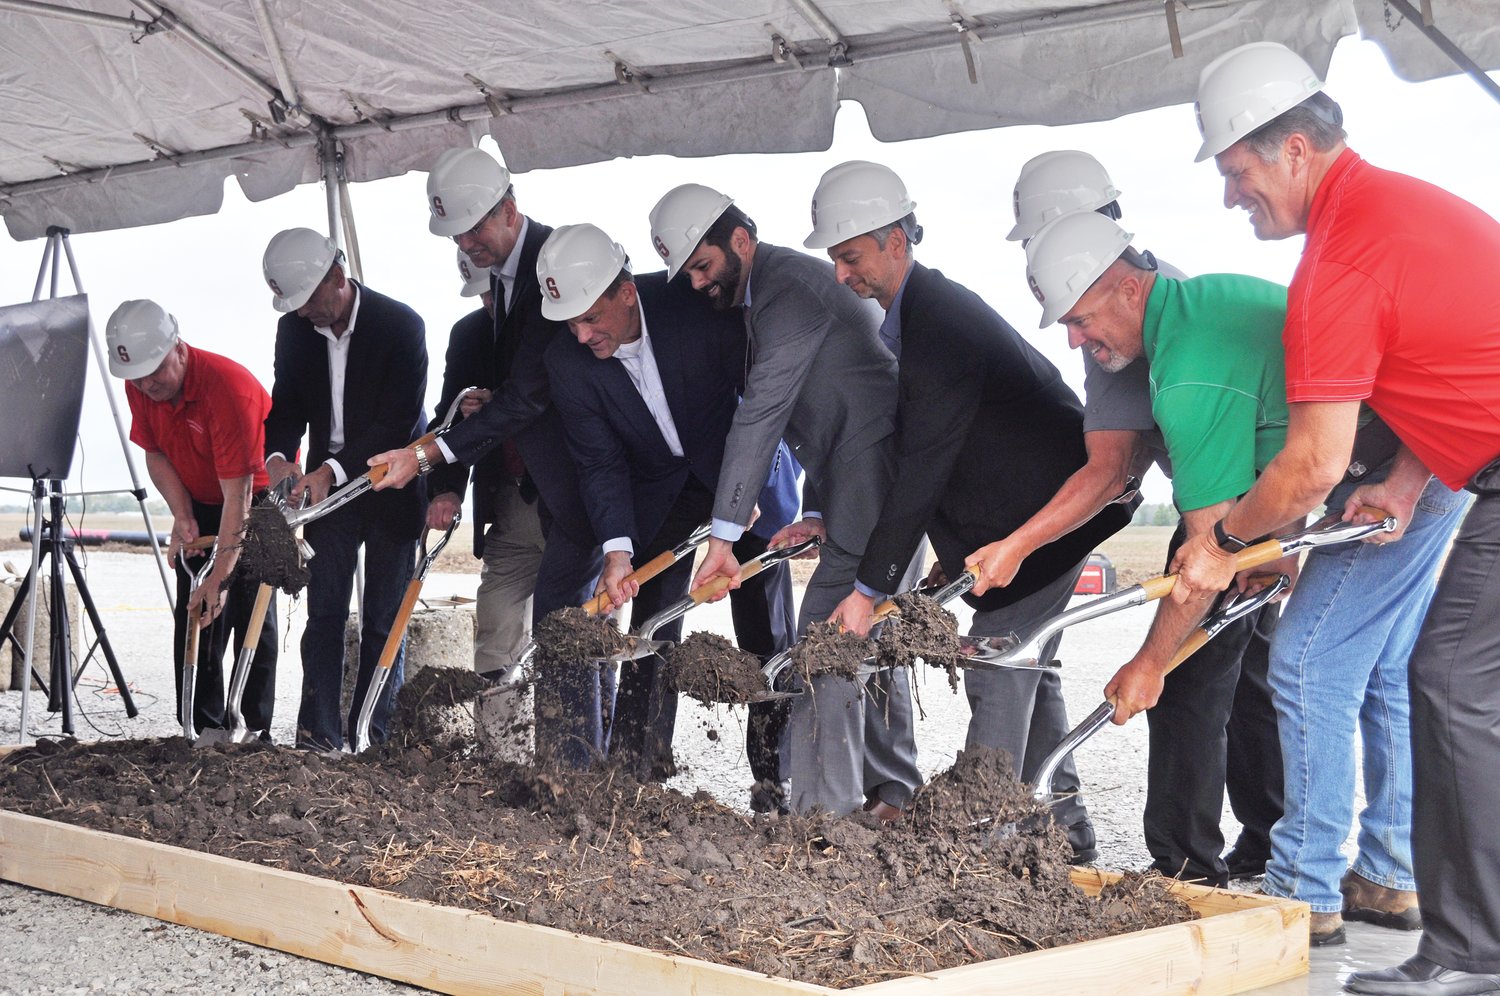 Dignitaries turn dirt at a groundbreaking ceremony for the Tempur Sealy plant on Thursday.